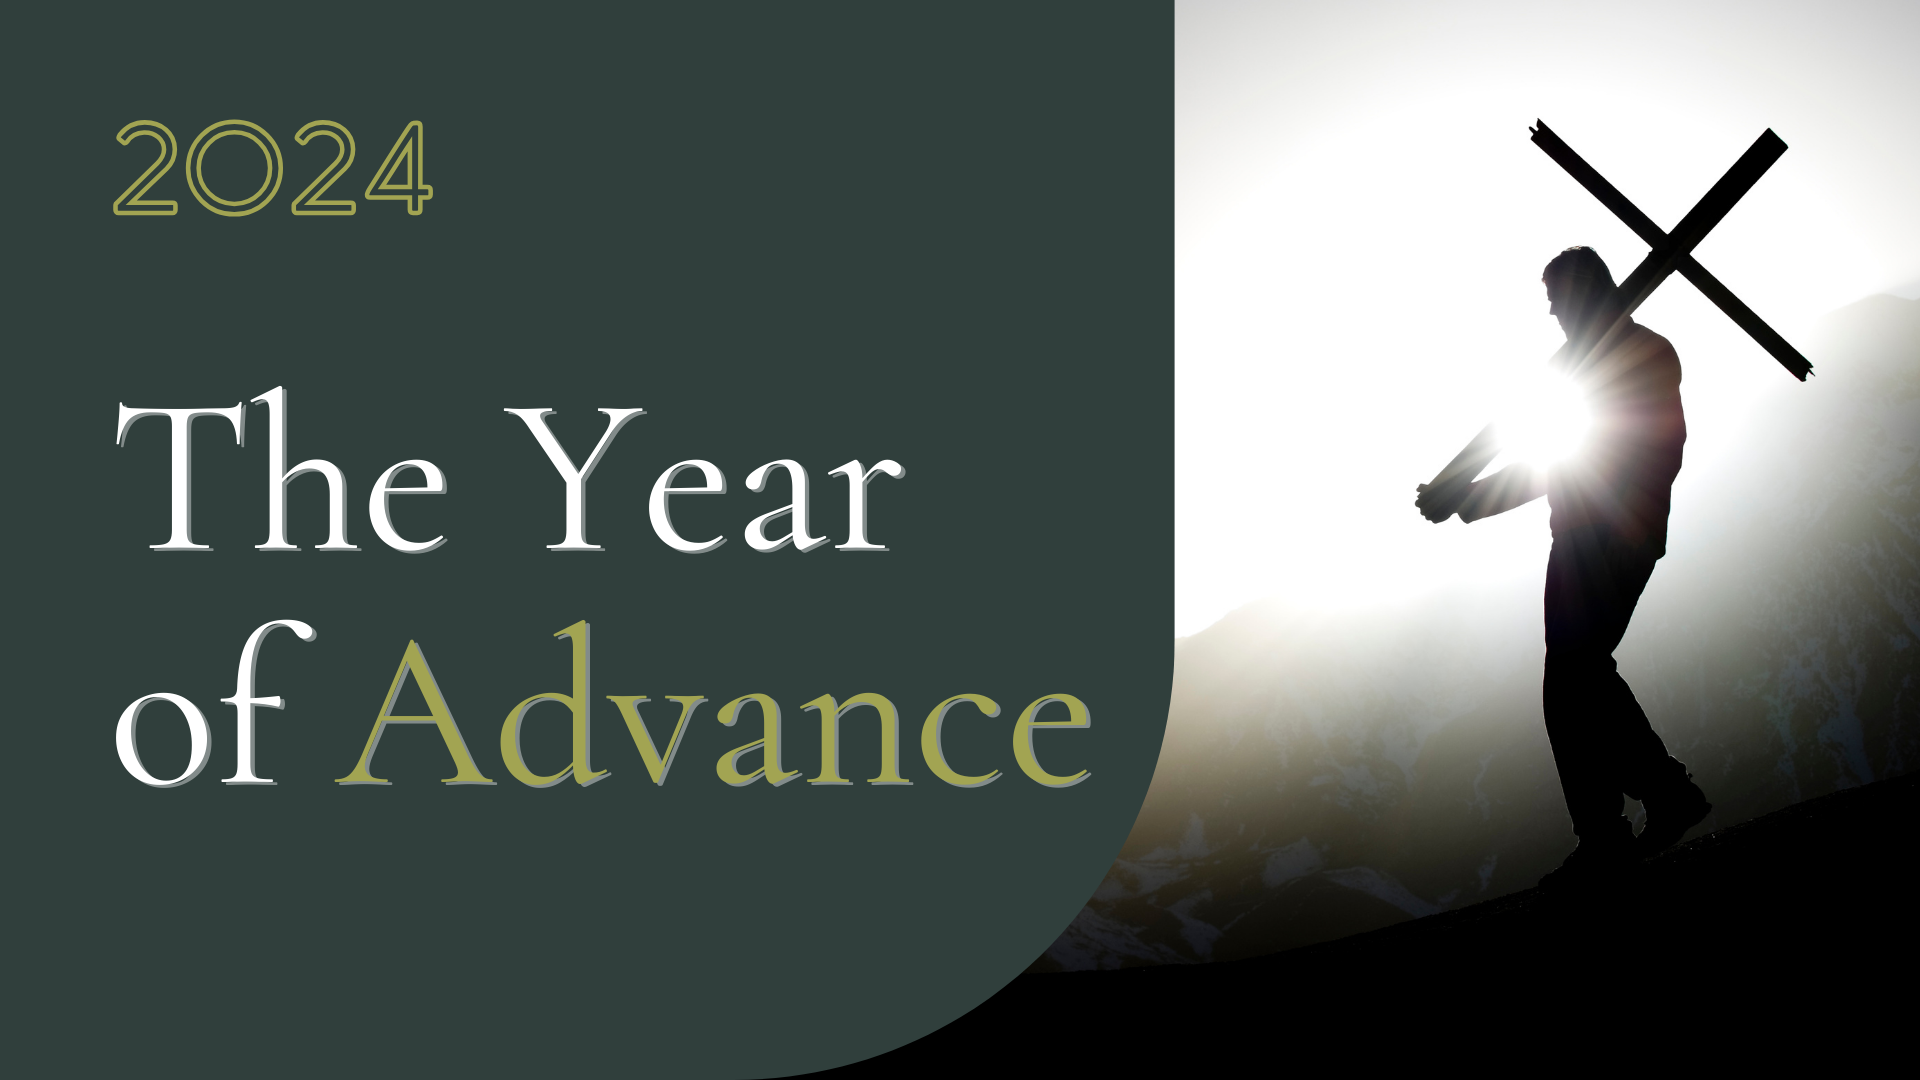 2024: The Year of Advance